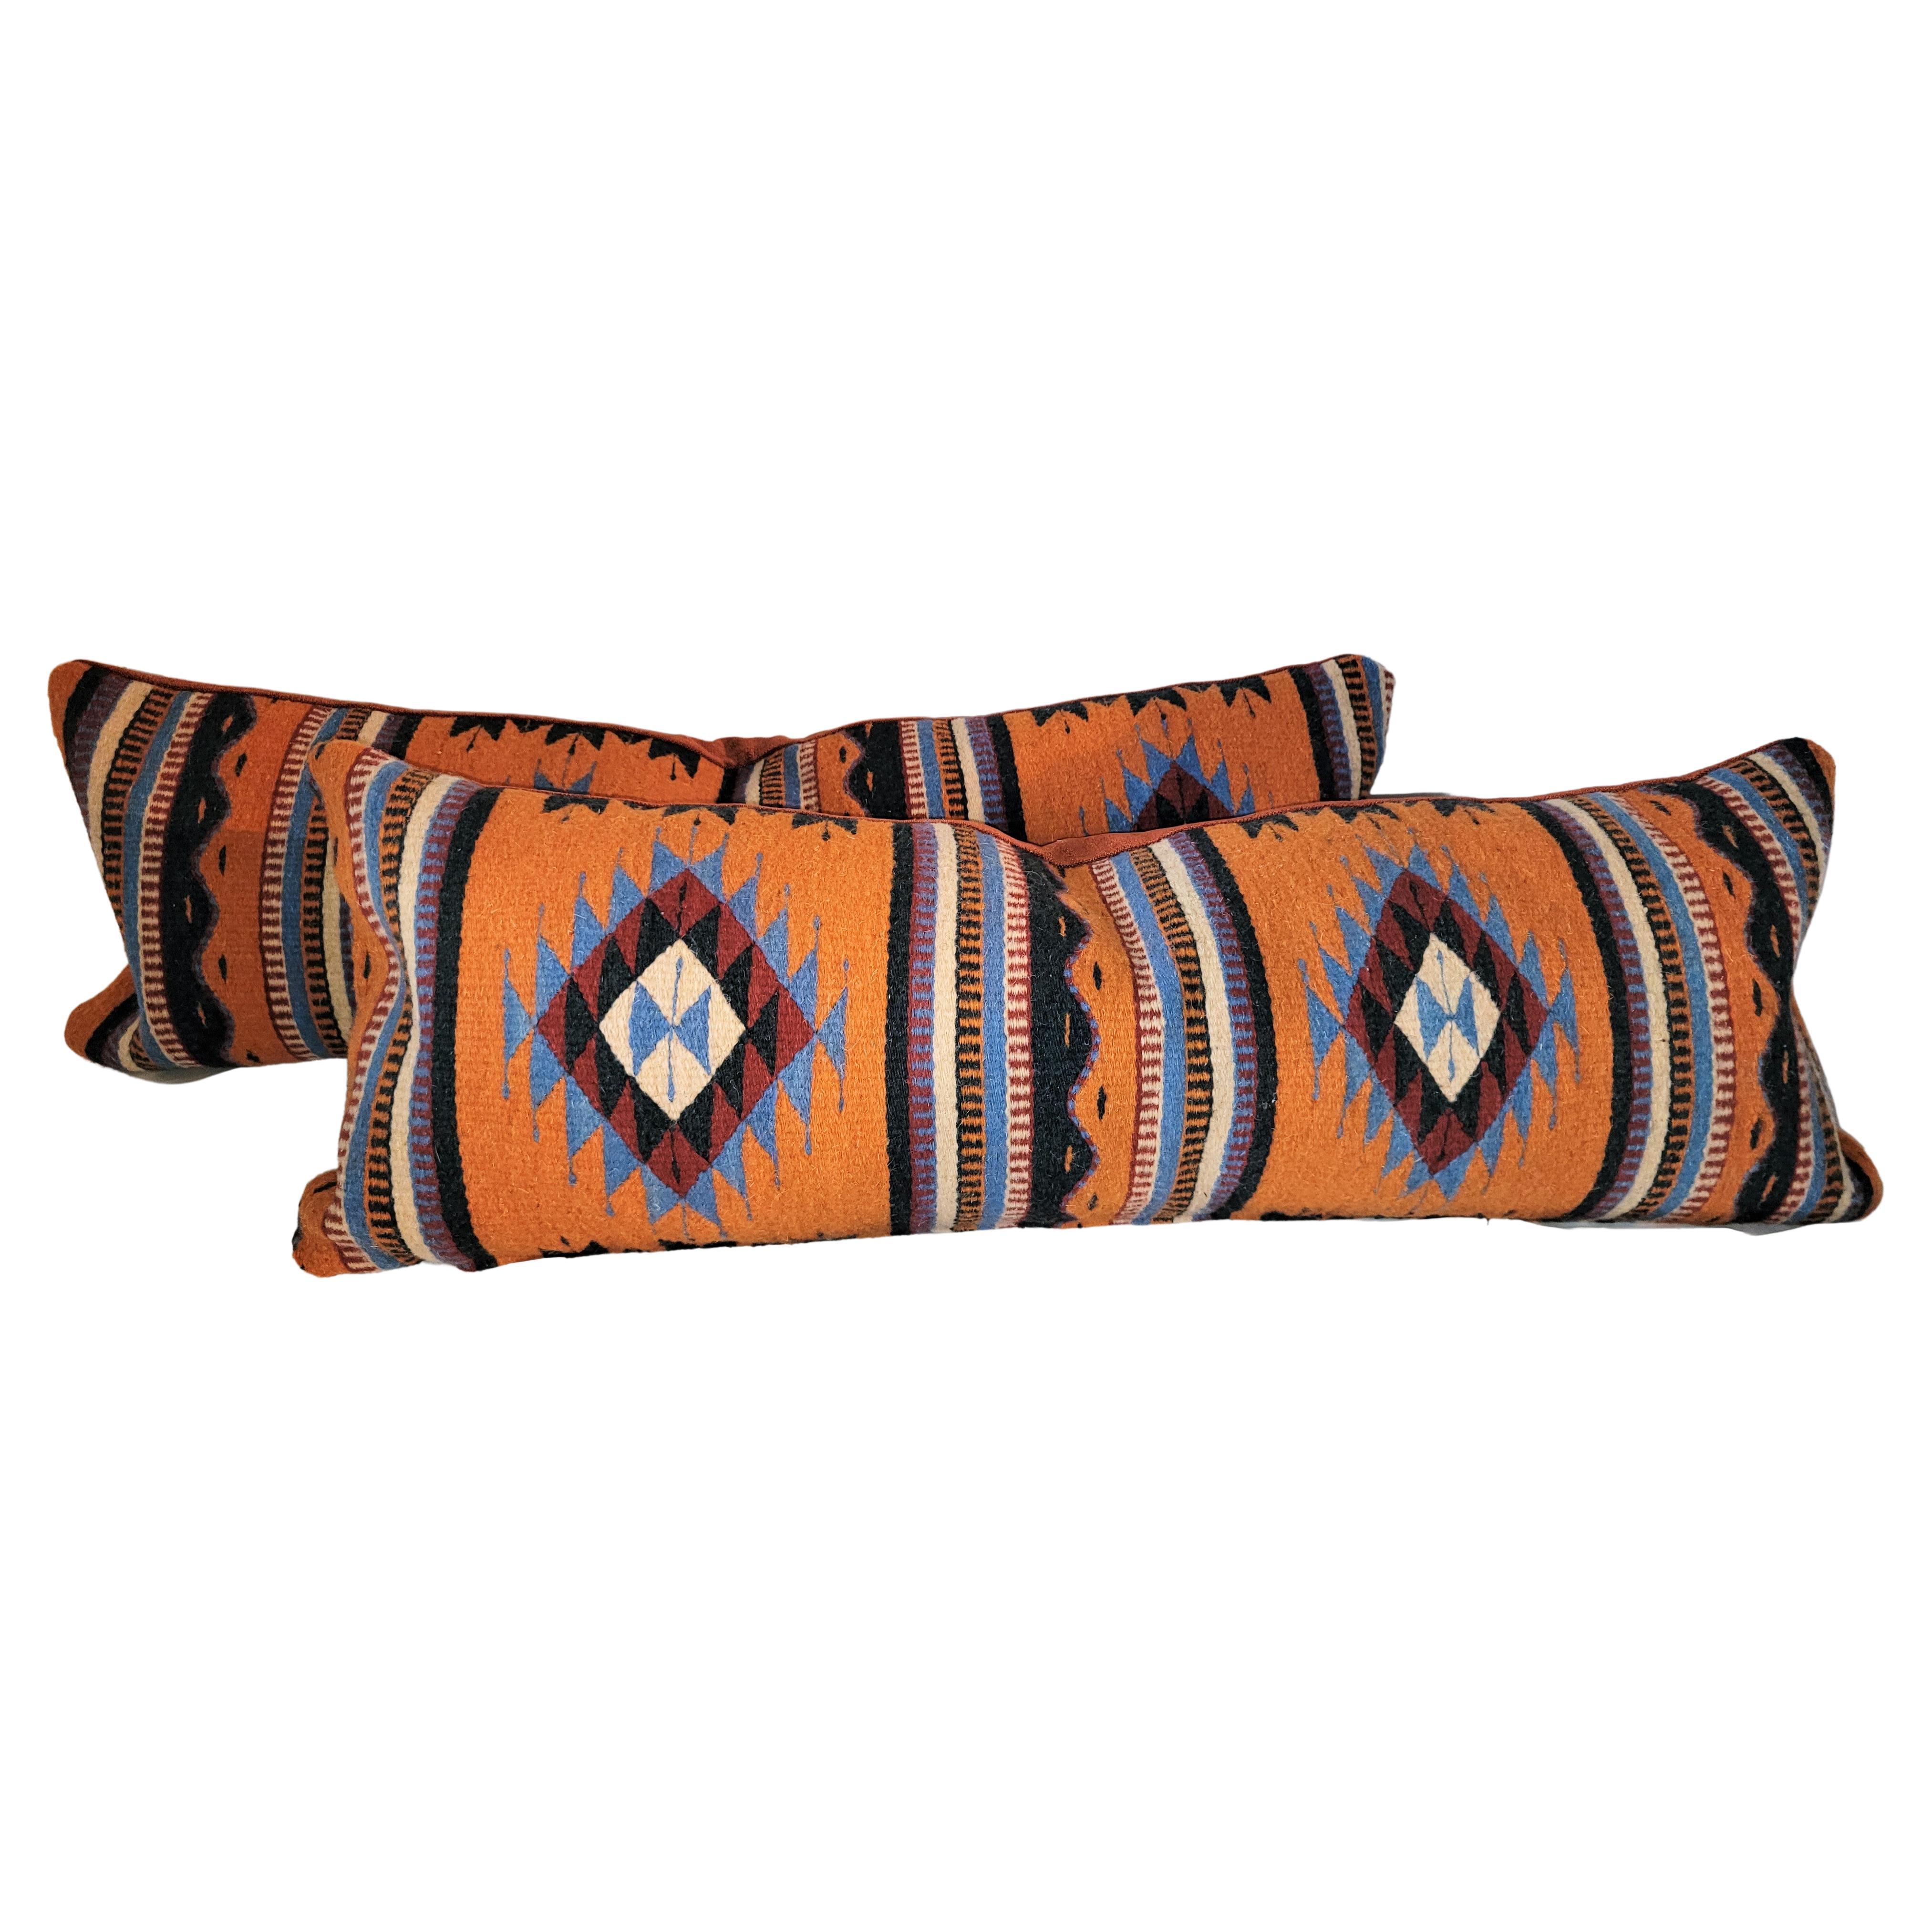 Mexican Indian Weaving Bolster Pillows For Sale